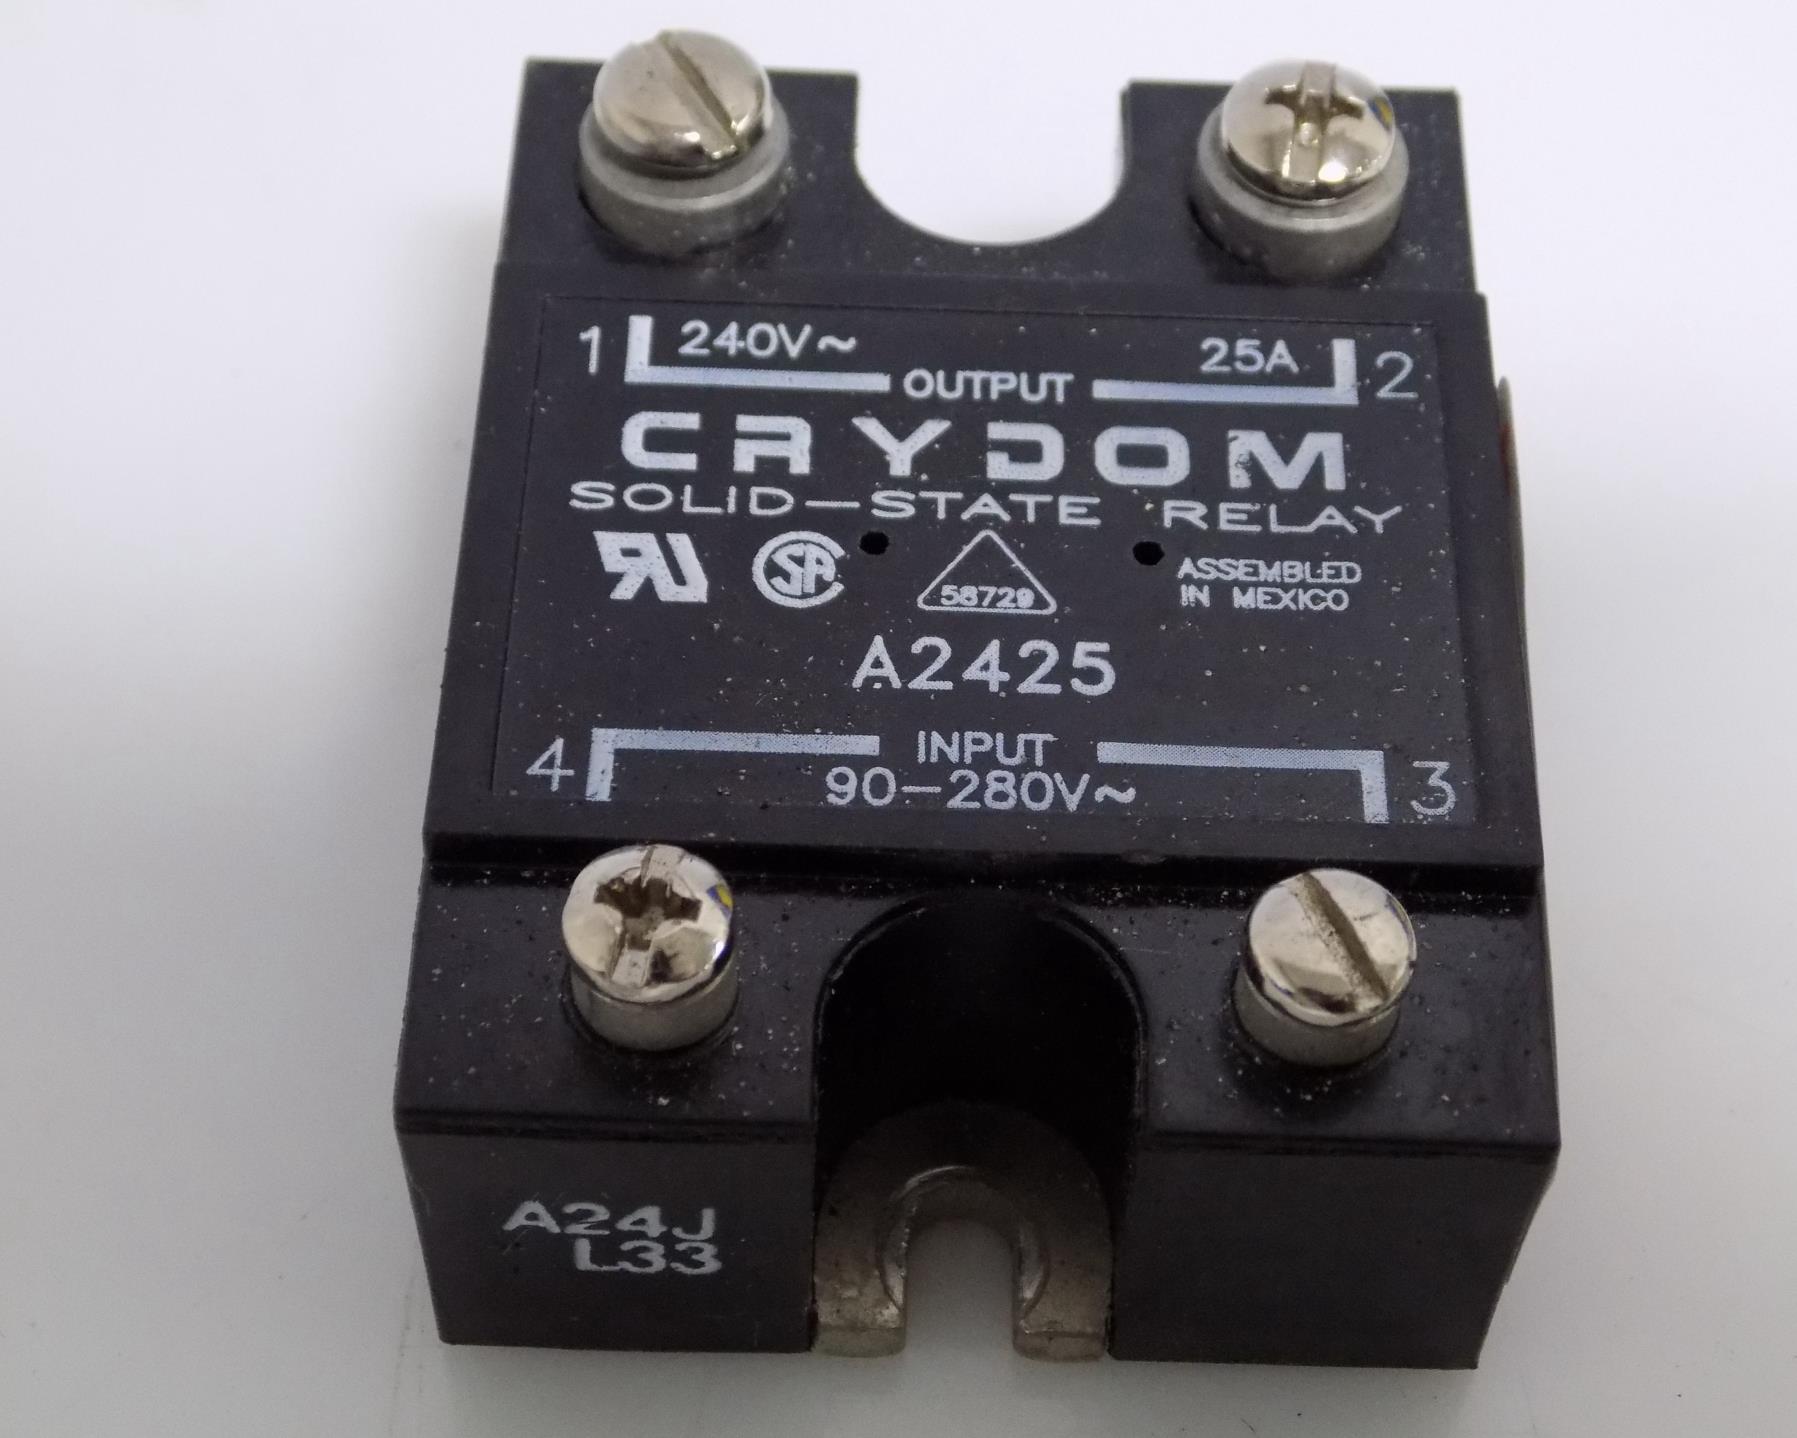 CRYDOM SOLID STATE RELAY A2425 | eBay